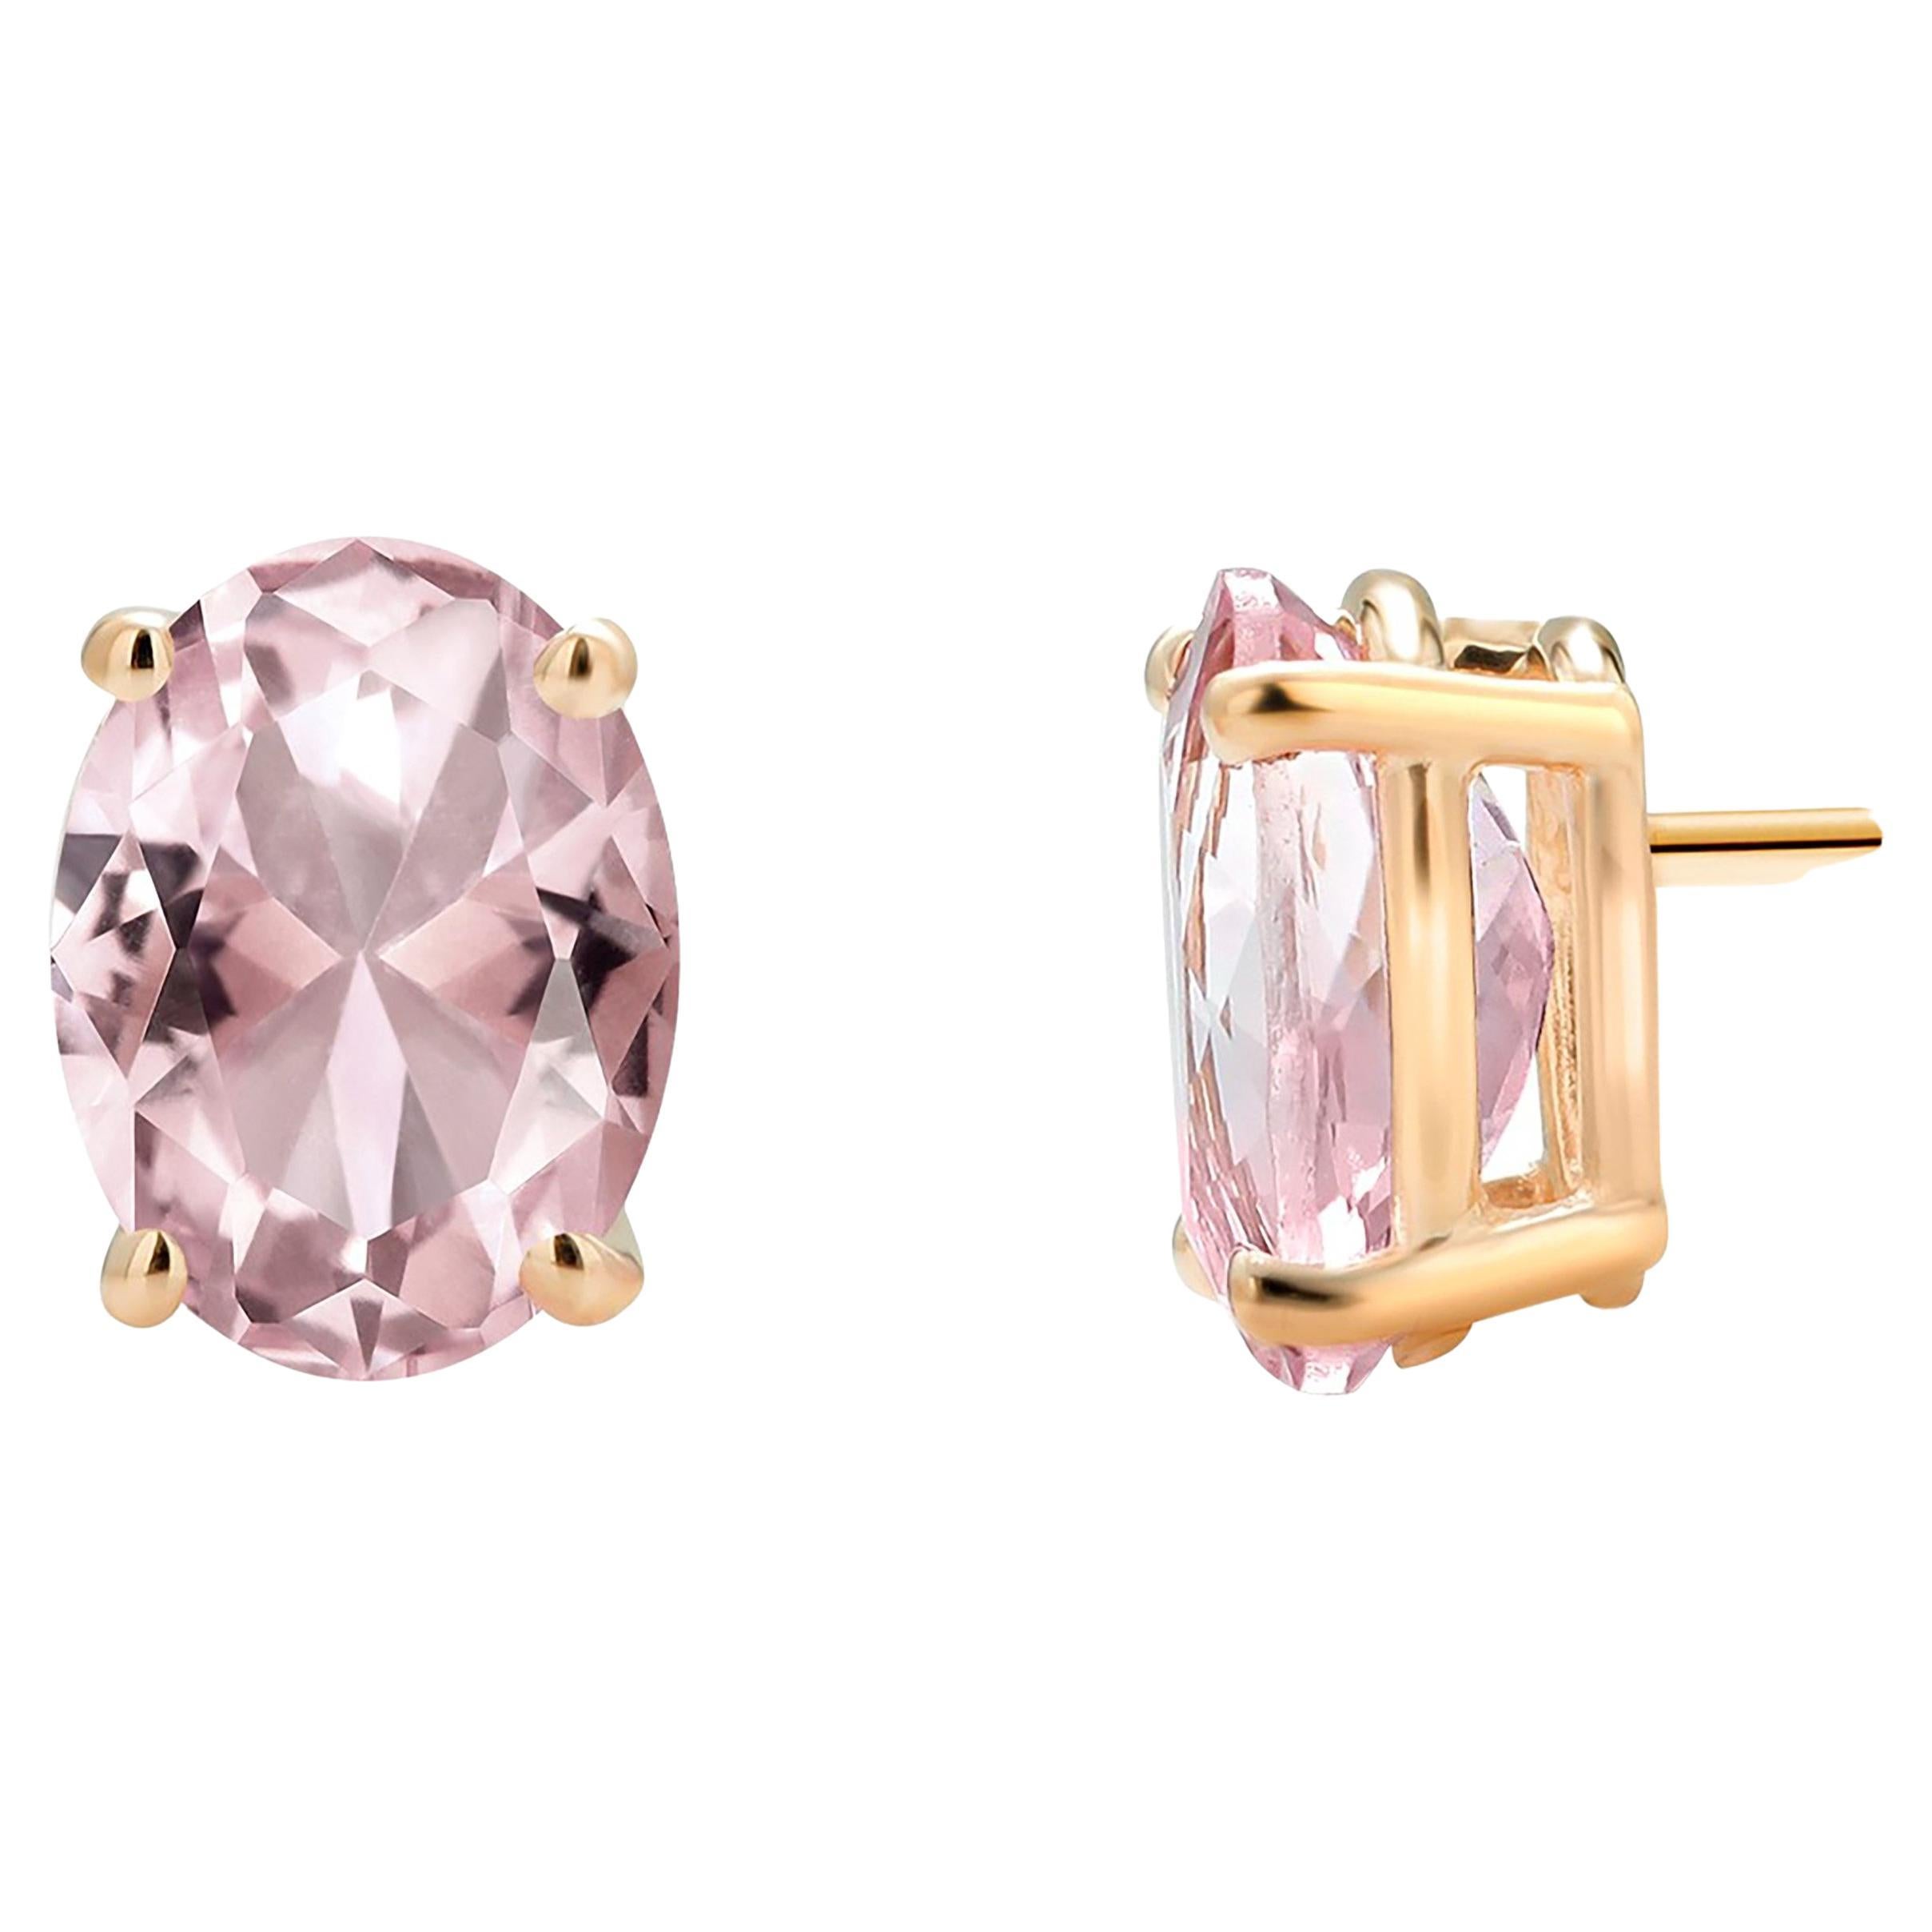 Oval Shaped Morganite Set in Yellow Gold Stud Earrings Weighing 5.95 Carats